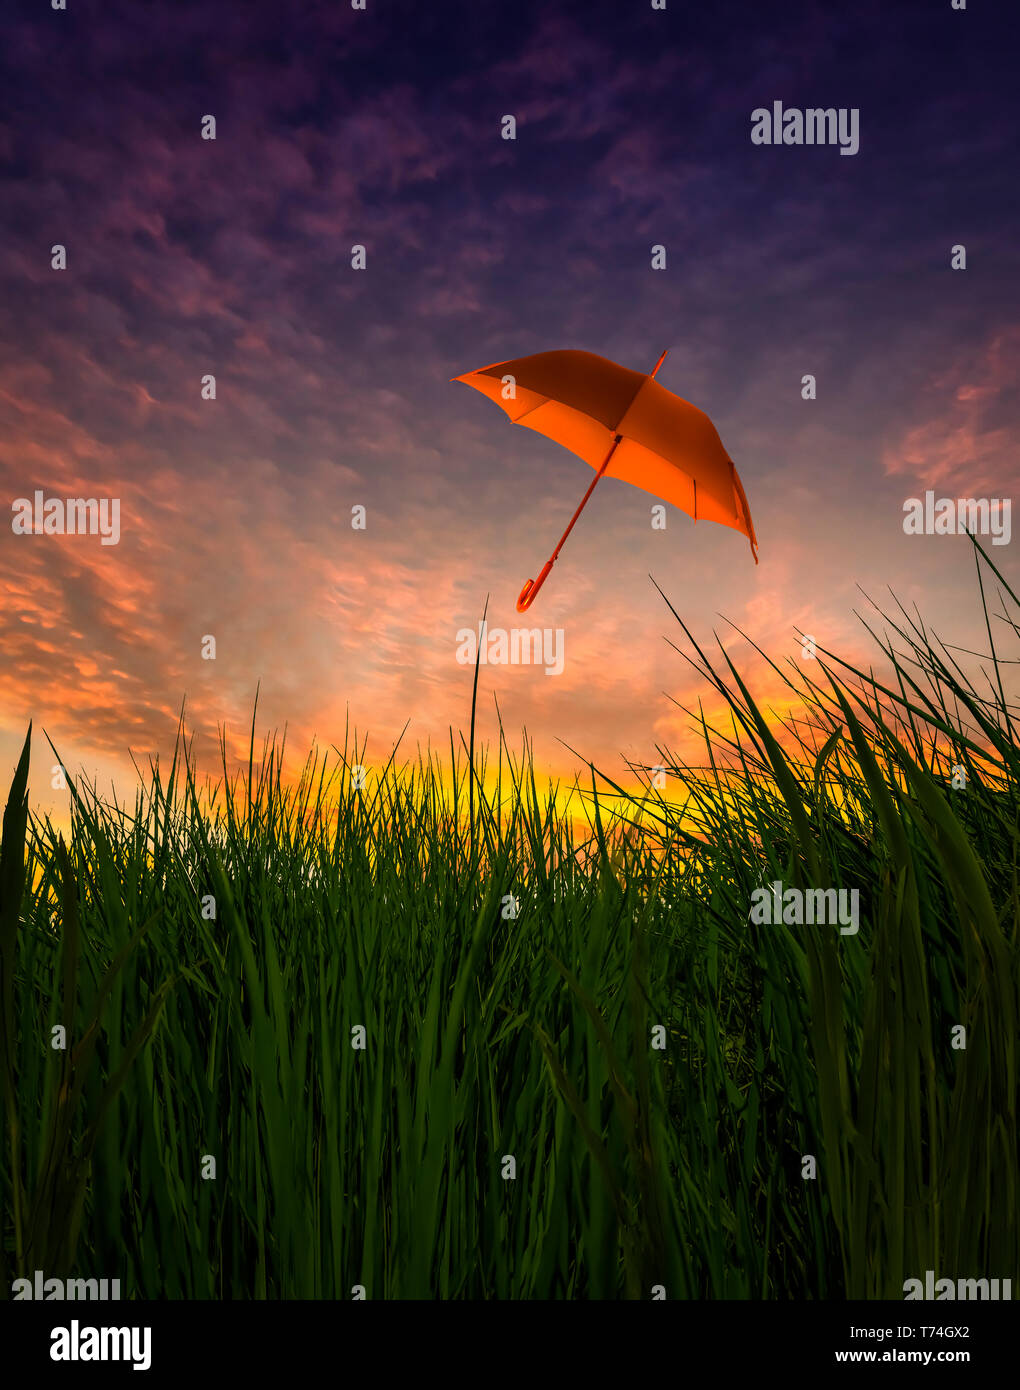 Composite image of an umbrella floating over grass at sunset Stock Photo